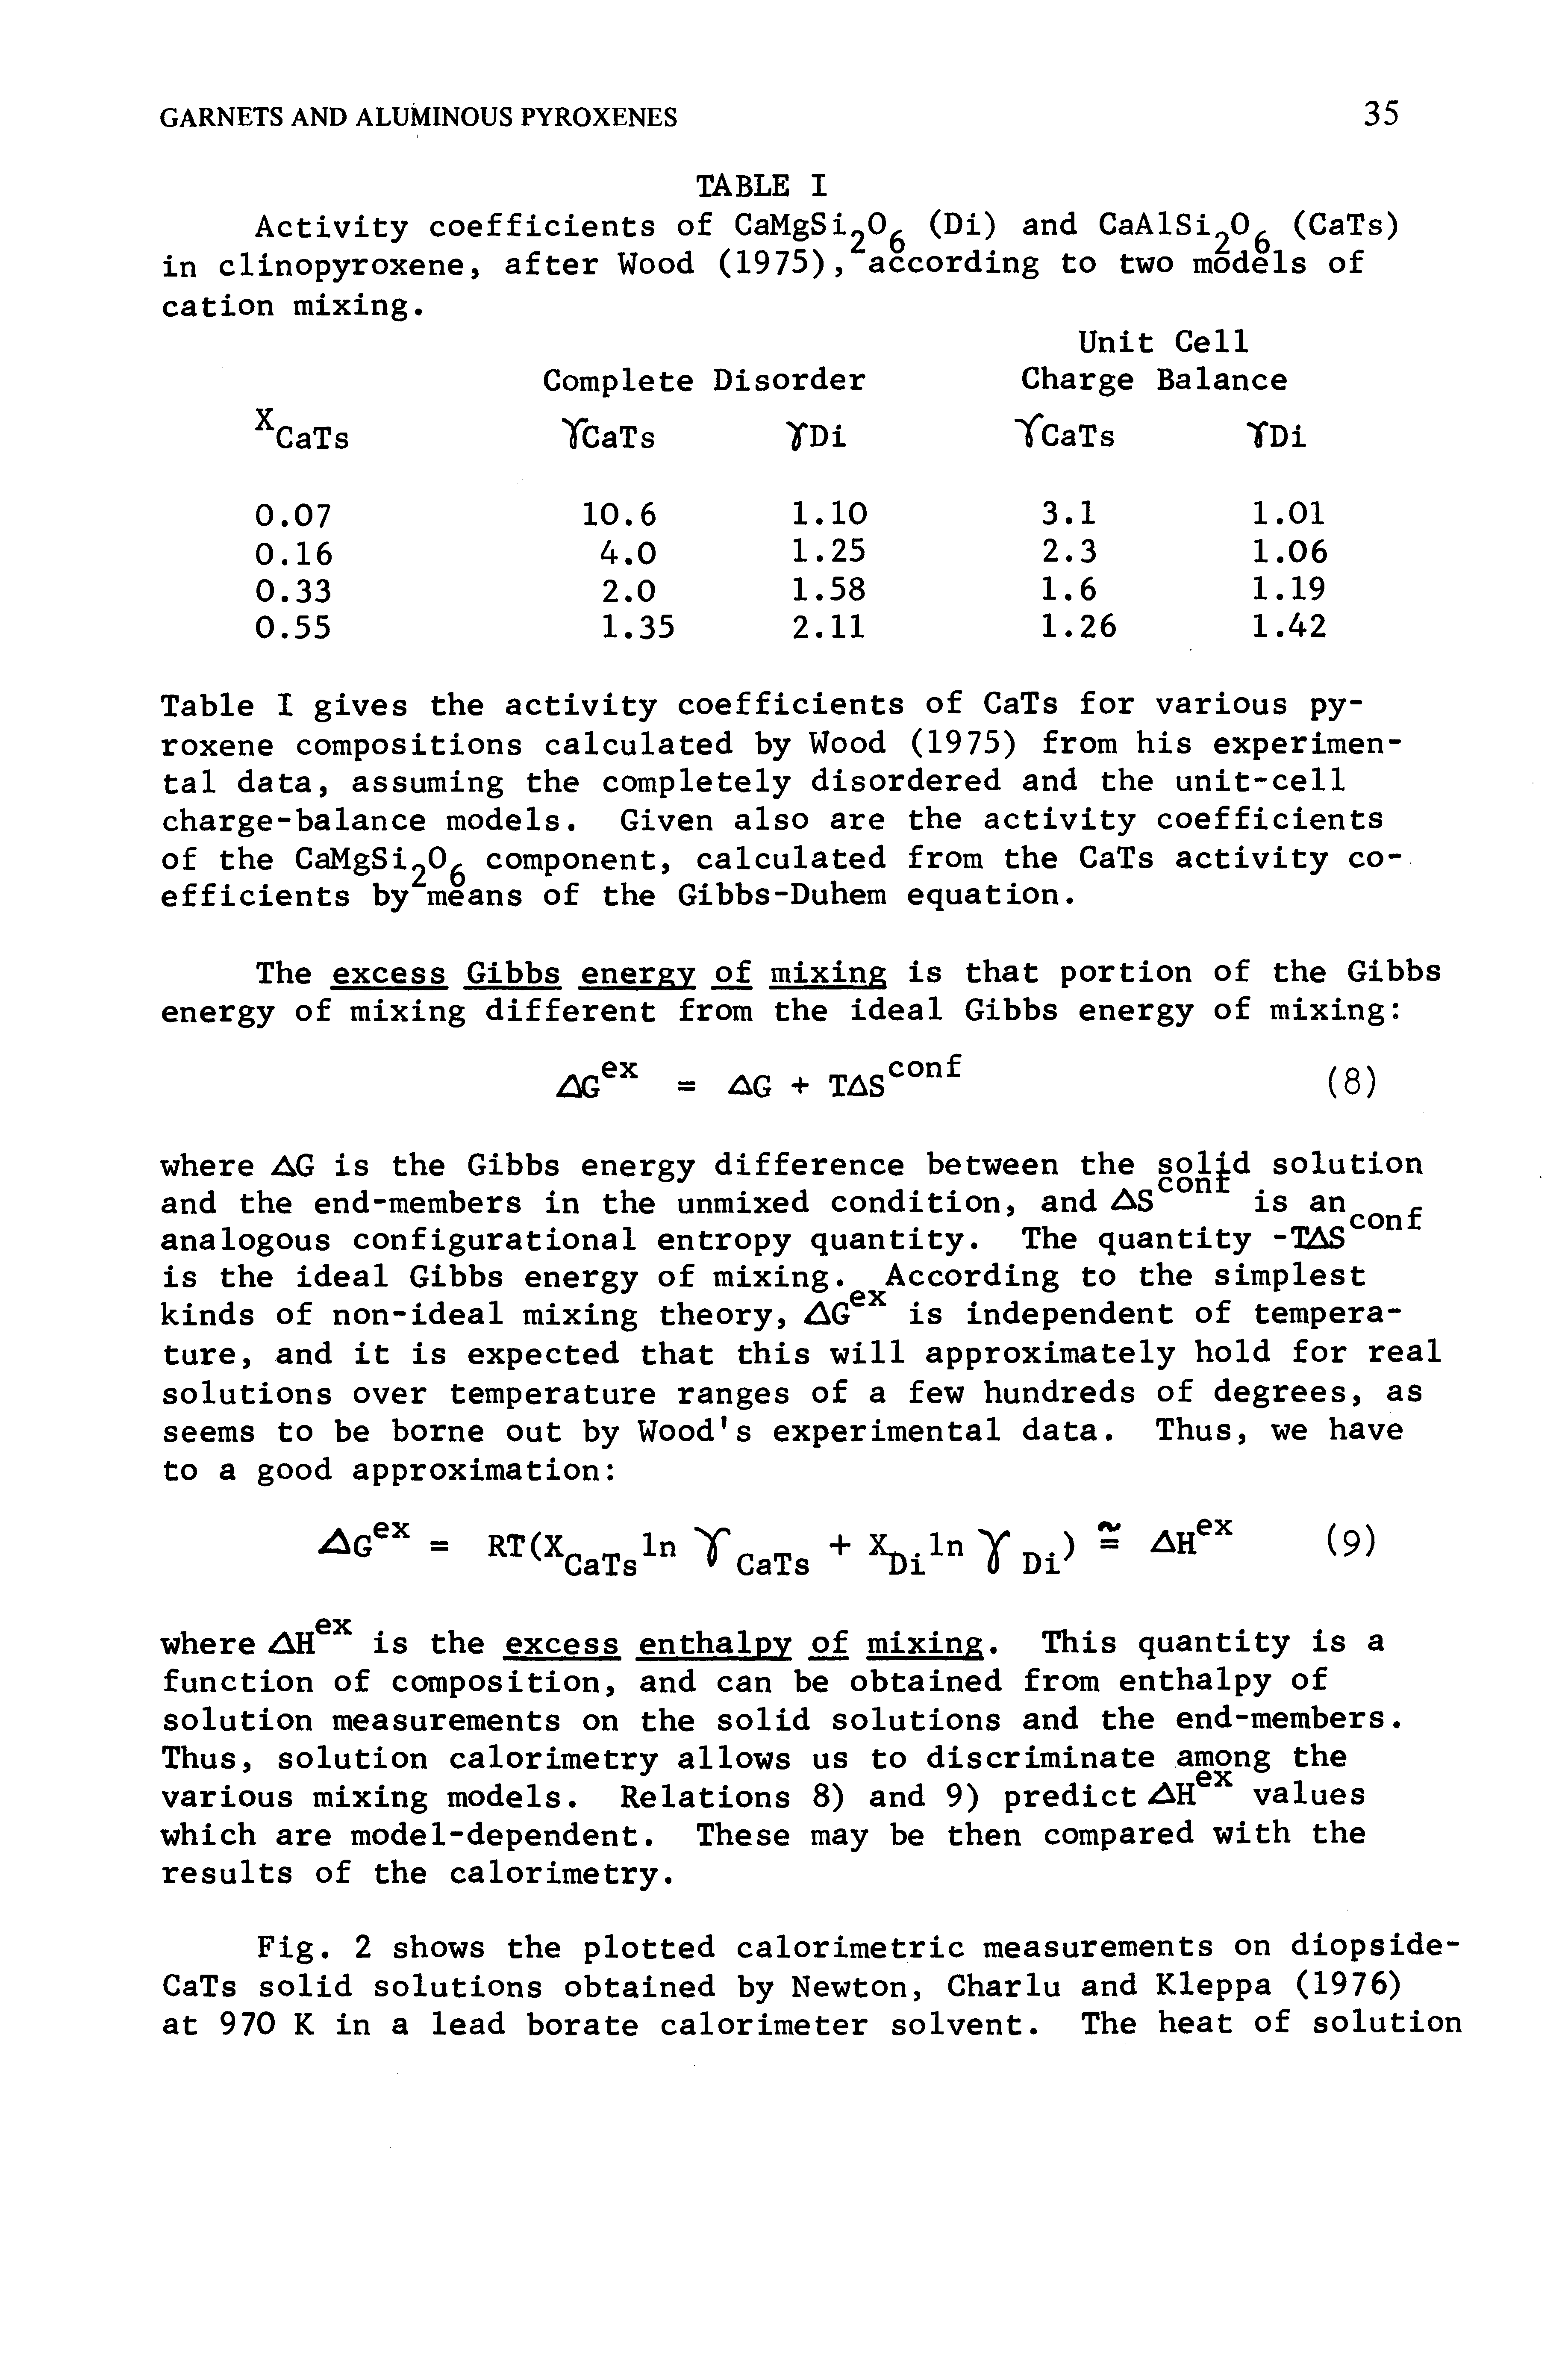 Table I gives the activity coefficients of CaTs for various pyroxene compositions calculated by Wood (1975) from his experimental data, assuming the completely disordered and the unit-cell charge-balance models. Given also are the activity coefficients of the CaMgSi20 component, calculated from the CaTs activity coefficients by means of the Gibbs-Duhem equation.